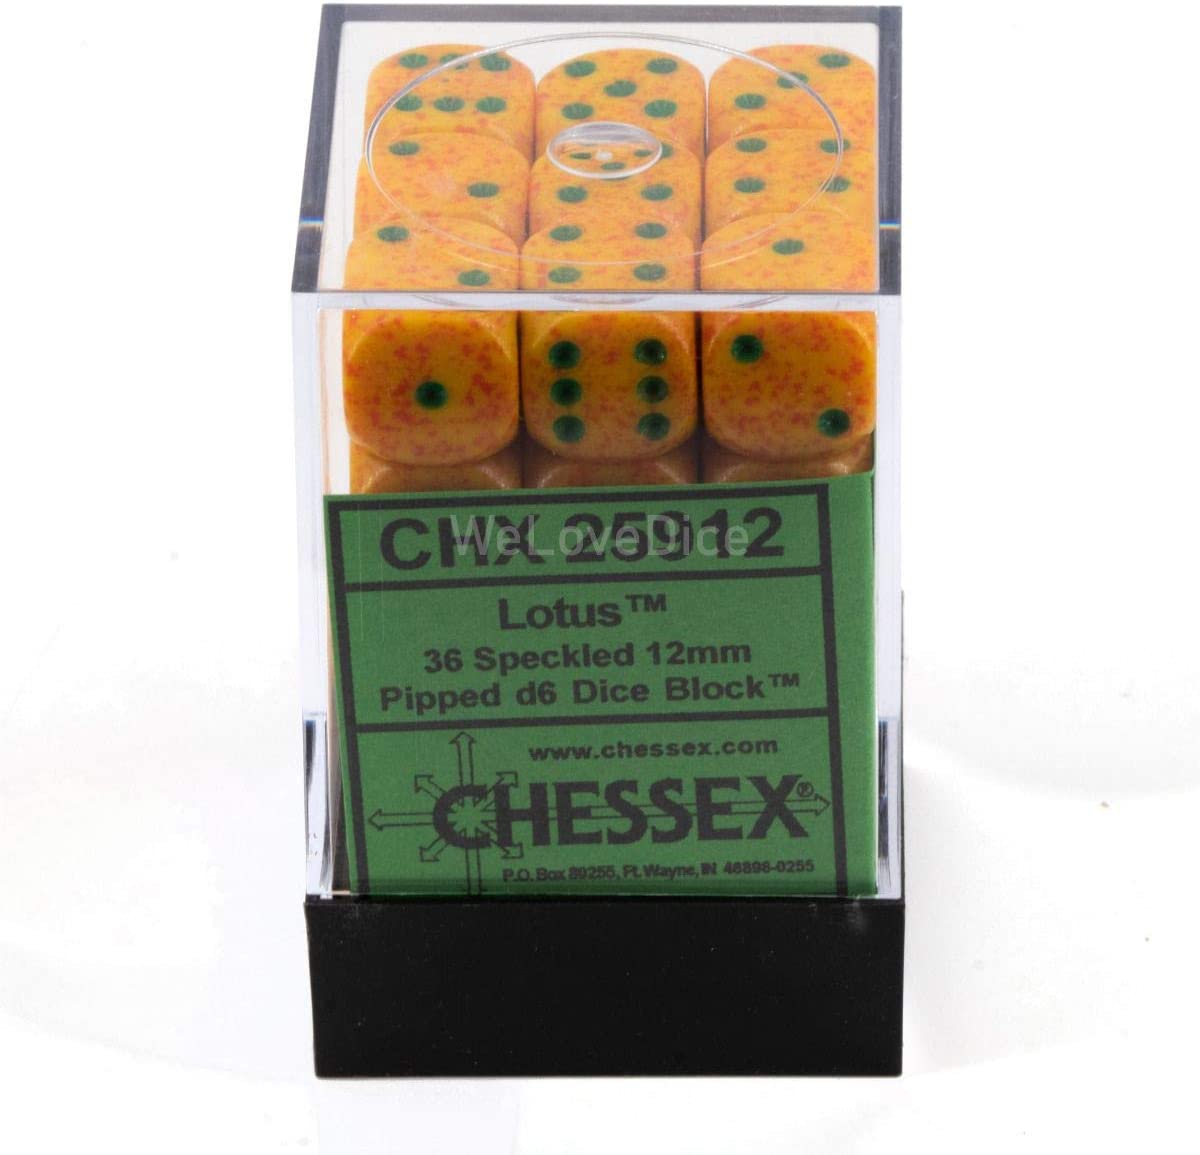 Chessex Dice: D6 Block 12mm - Speckled - Lotus (CHX 25912) - Gamescape